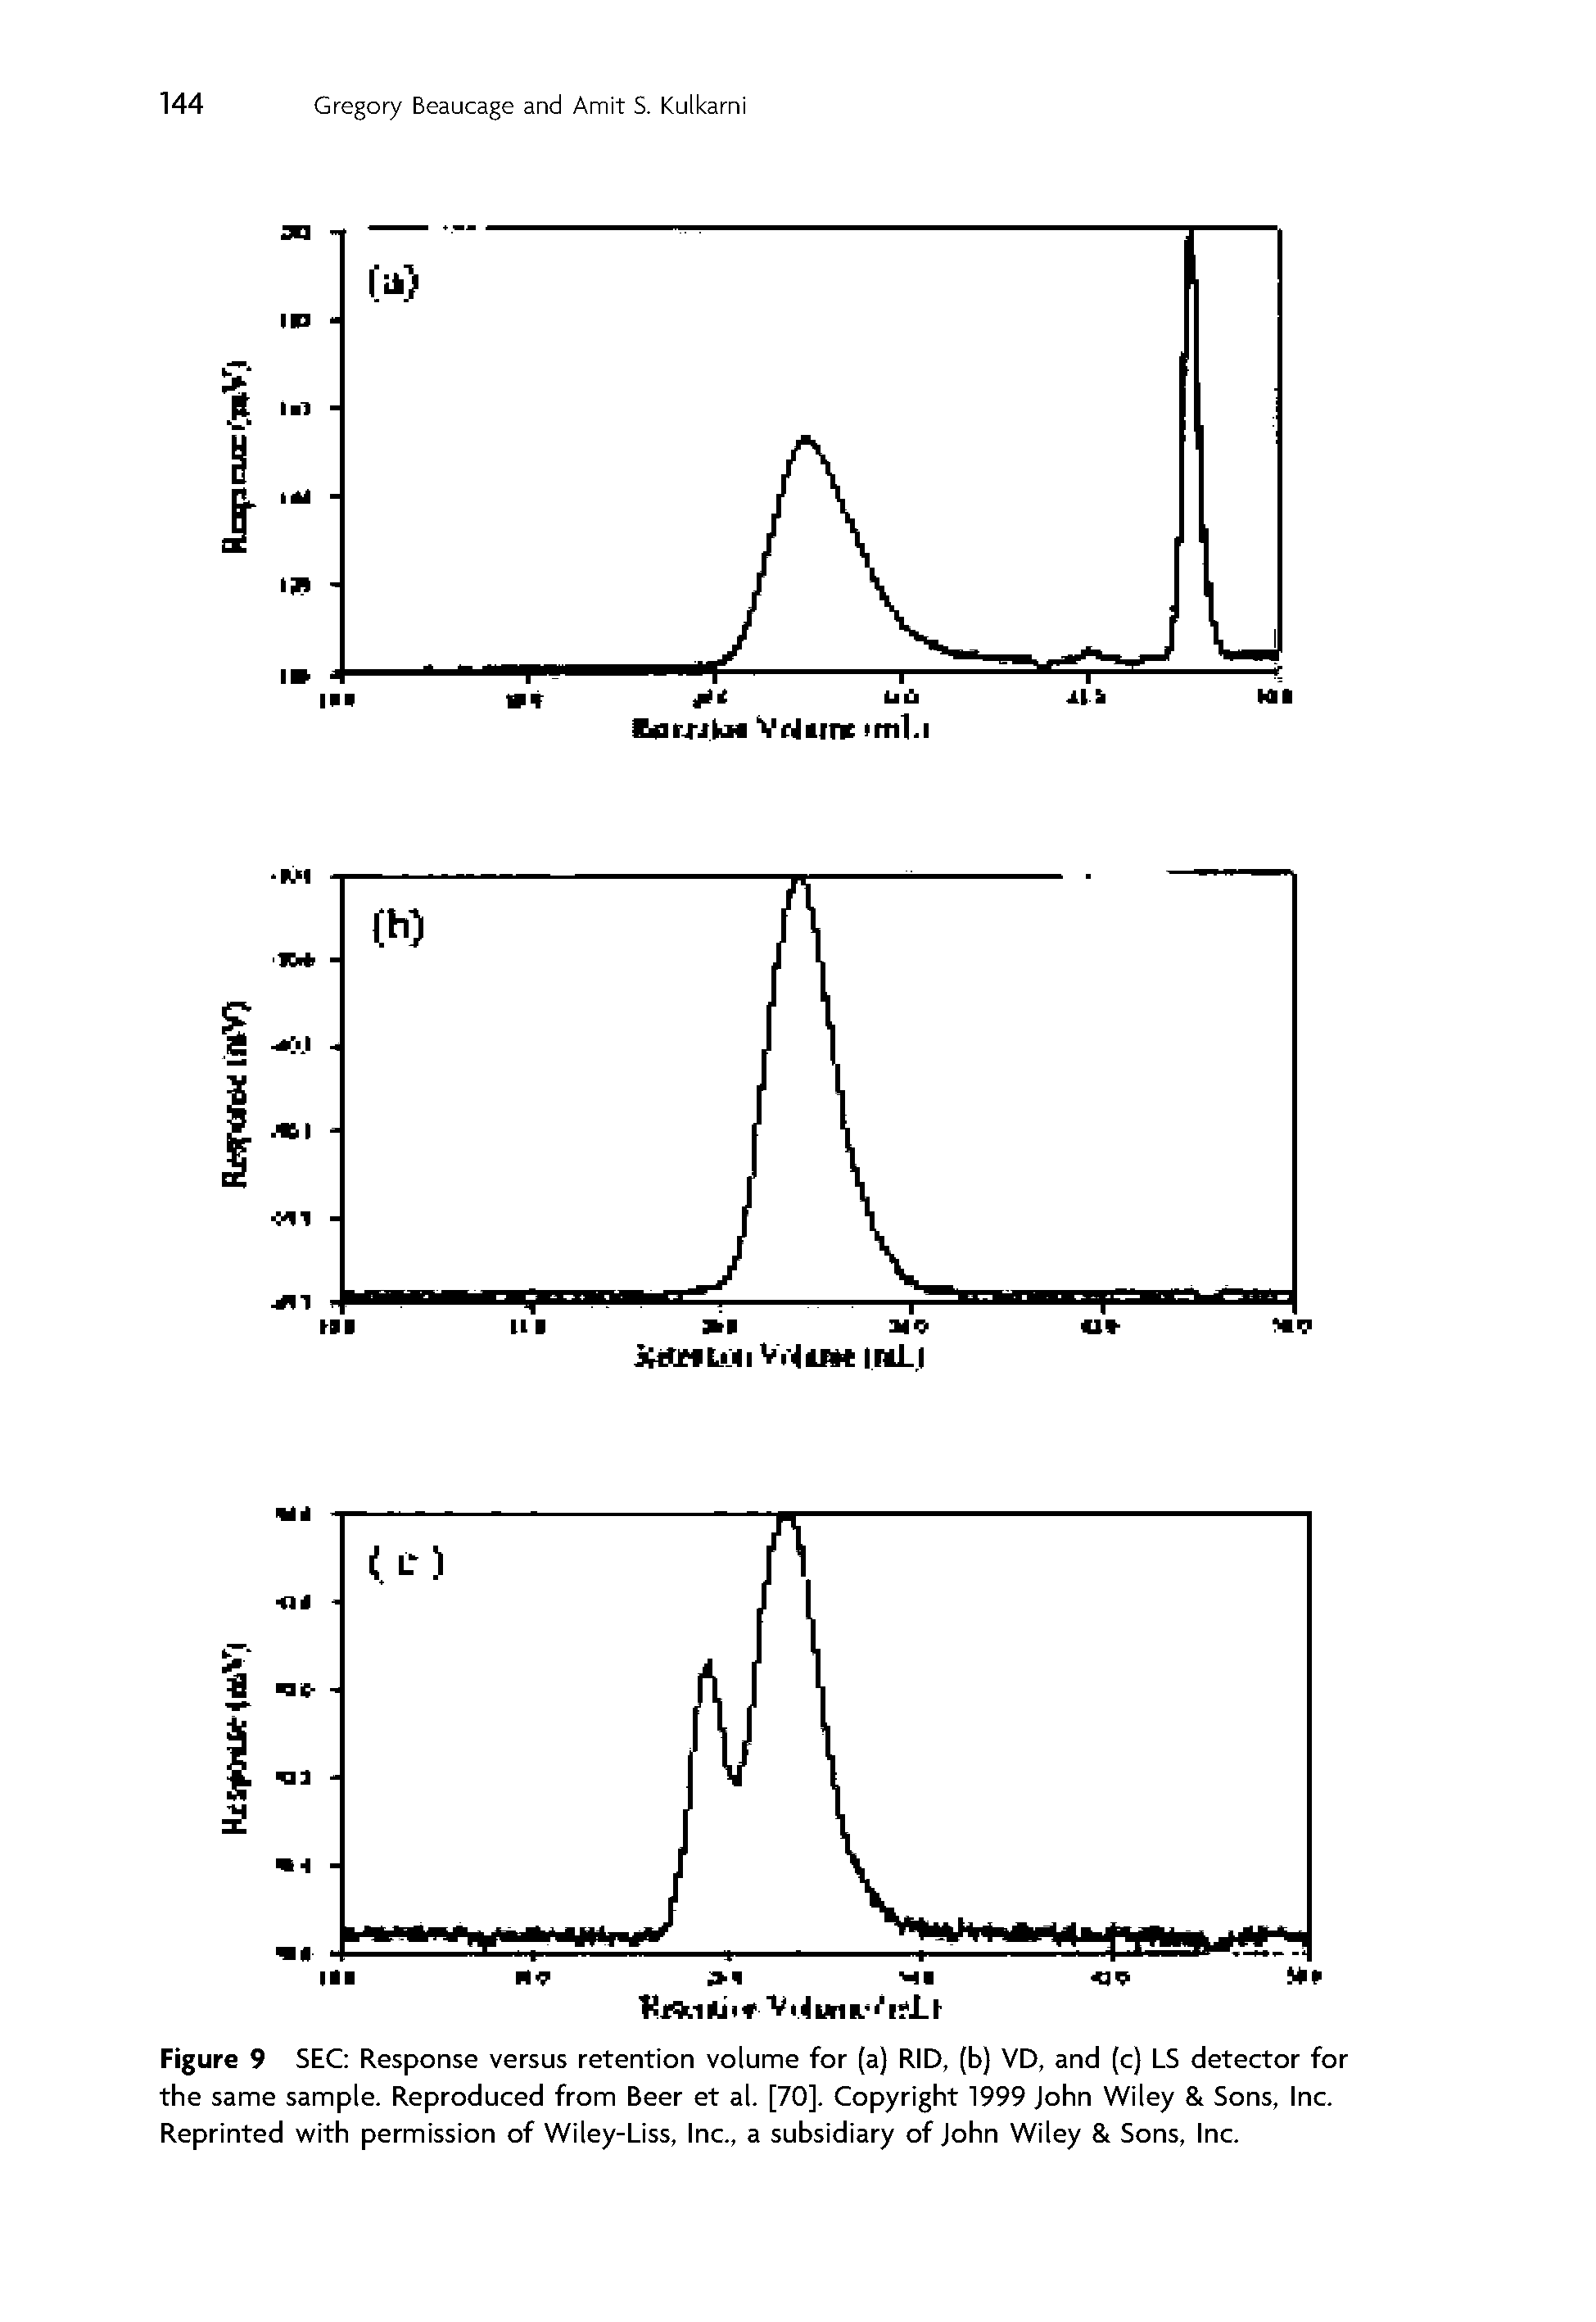 Figure 9 SEC Response versus retention volume for (a) RID, (b) VD, and (c) LS detector for the same sample. Reproduced from Beer et al. [70]. Copyright 1999 John Wiley Sons, Inc. Reprinted with permission of Wiley-Liss, Inc., a subsidiary of John Wiley Sons, Inc.